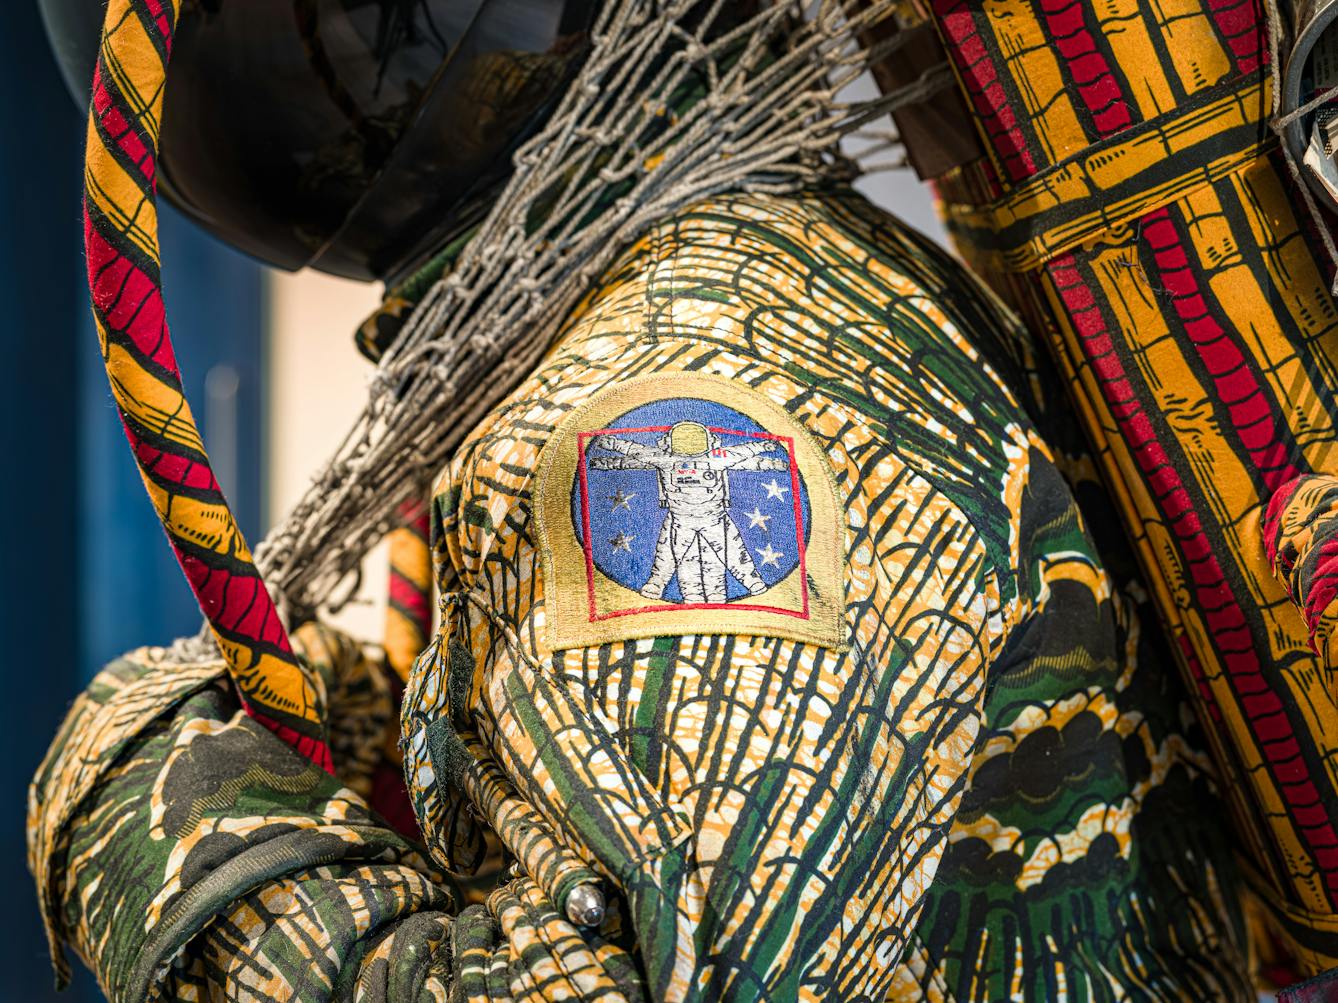 Photograph of a close-up detail of the shoulder of a life-size artwork of a figure resembling an astronaut, carrying a large net containing assorted objects. On the shoulder is an embroidered badge showing an astronaut with arms and legs outstretched within a blue circle.